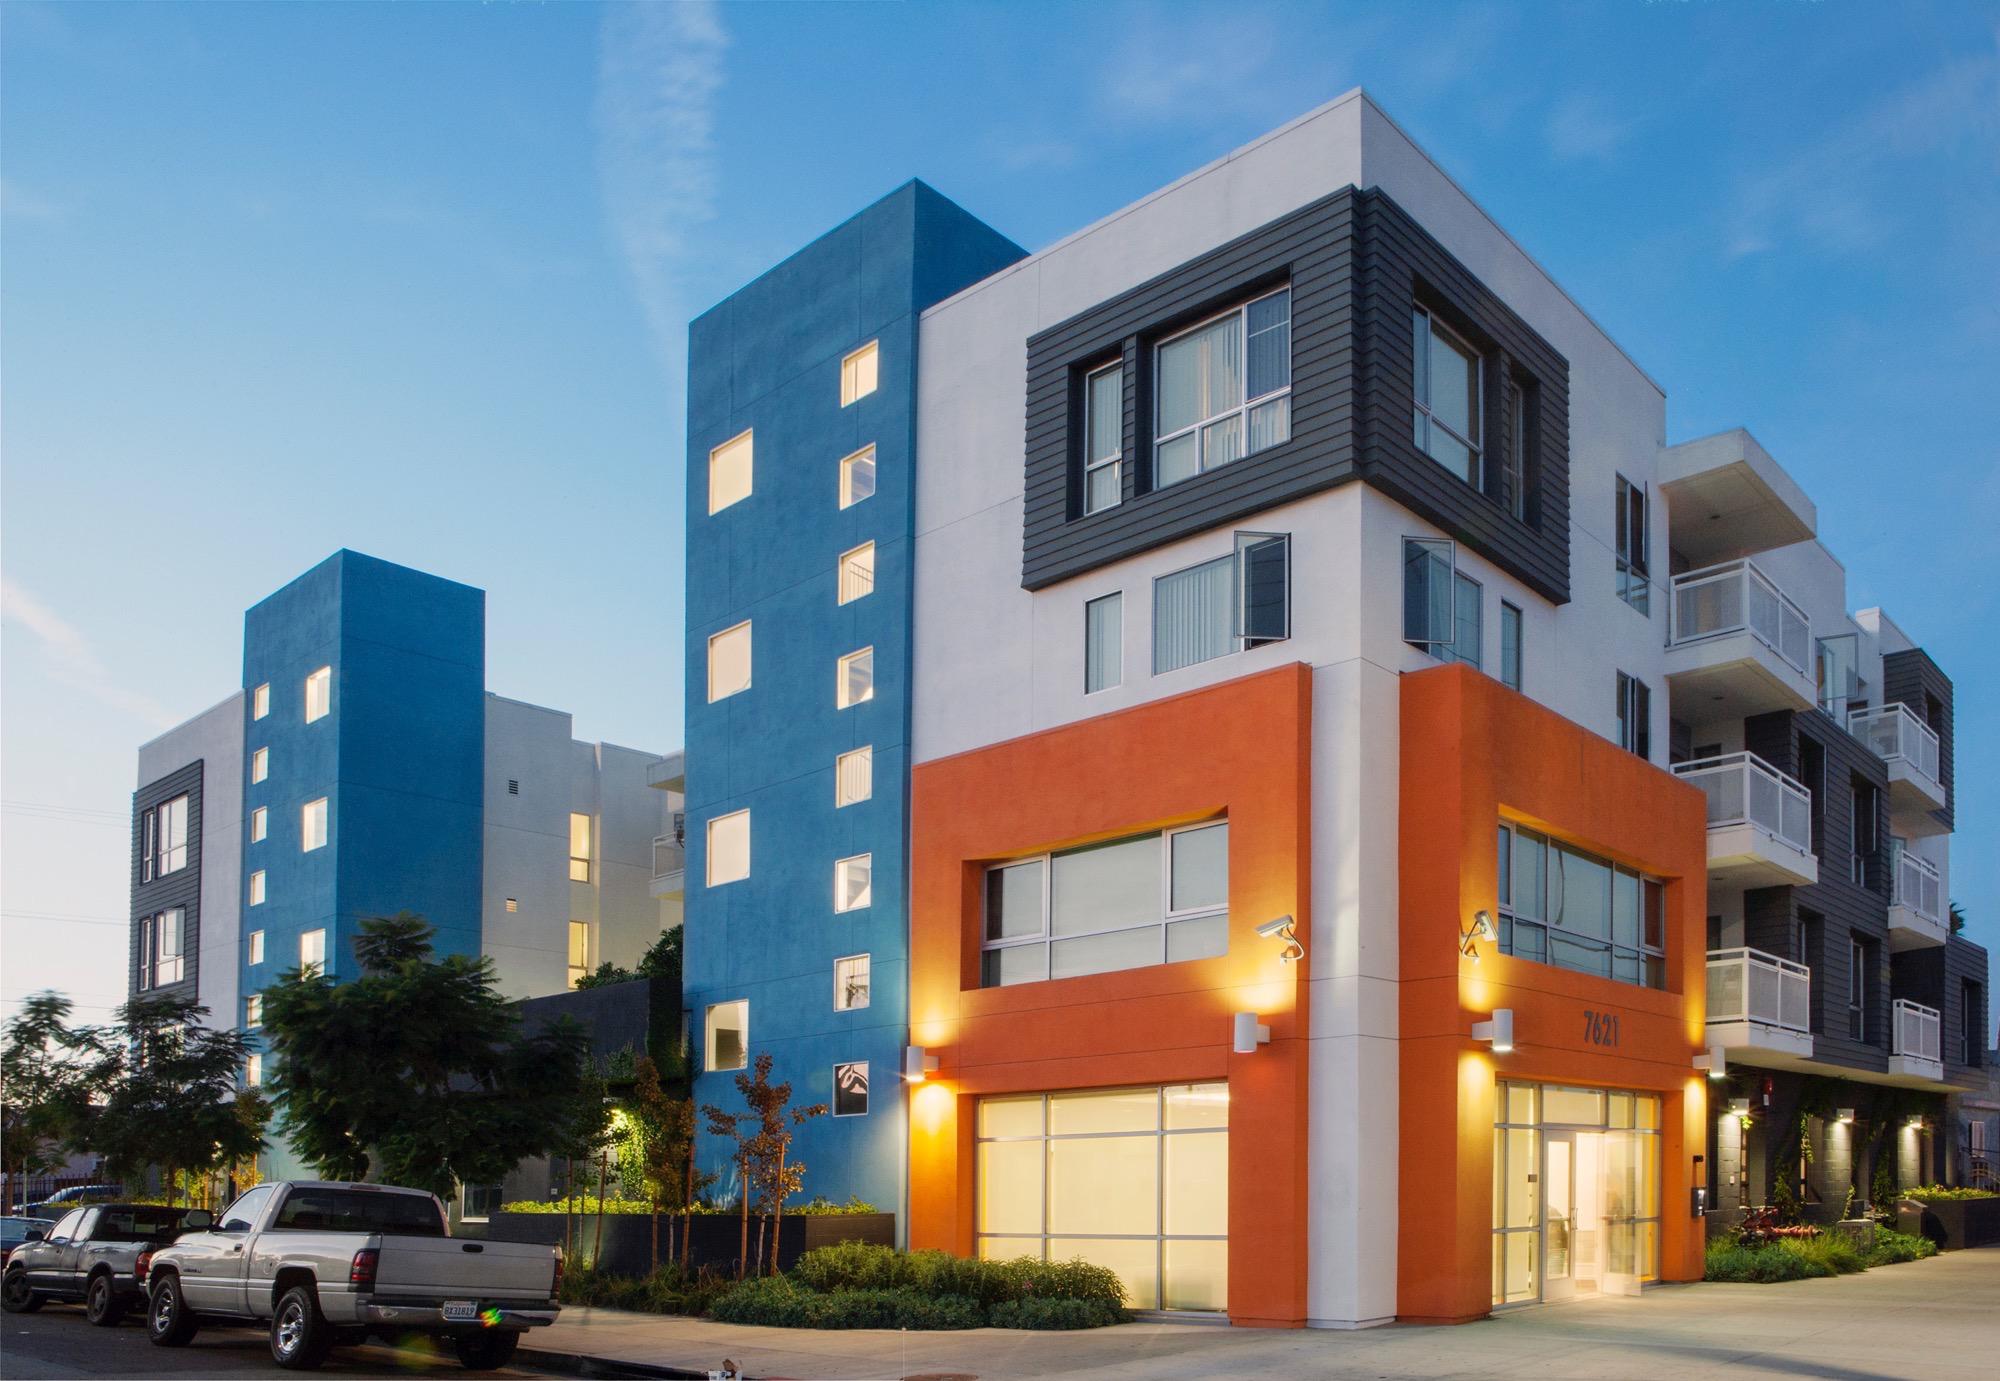 Front side view of a modern four story building. Buildong colors consist of light blue, white, gray and orange. Some units have tall windows, and some have balconies. There is newly planted trees in the front sidewalk and bushes on the side of the buildin